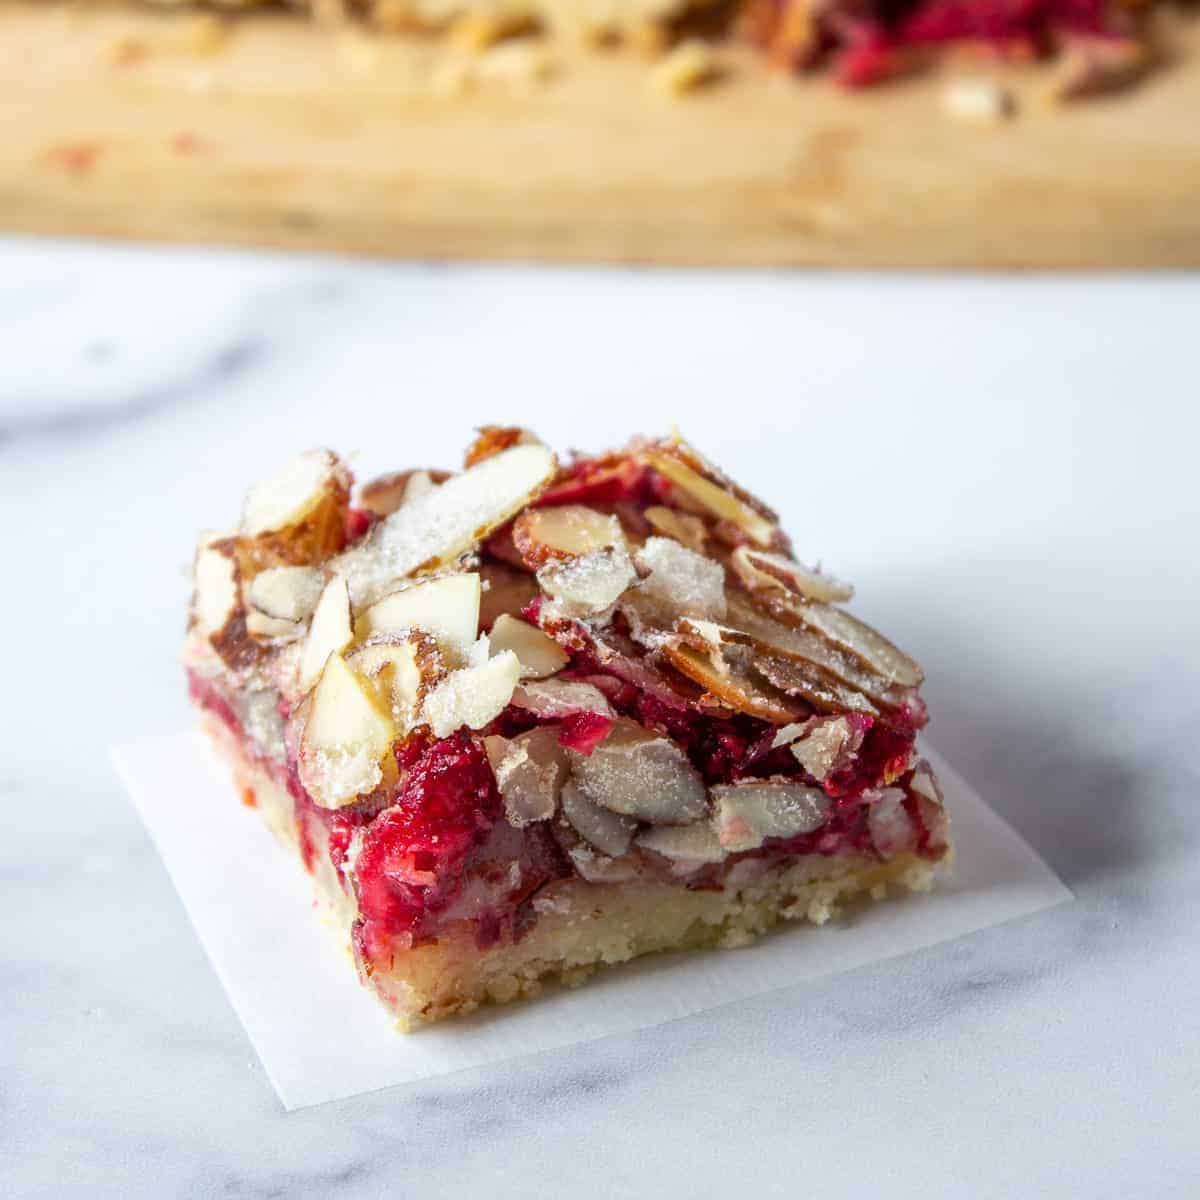 A cookie bar with cranberries and topped with almonds.